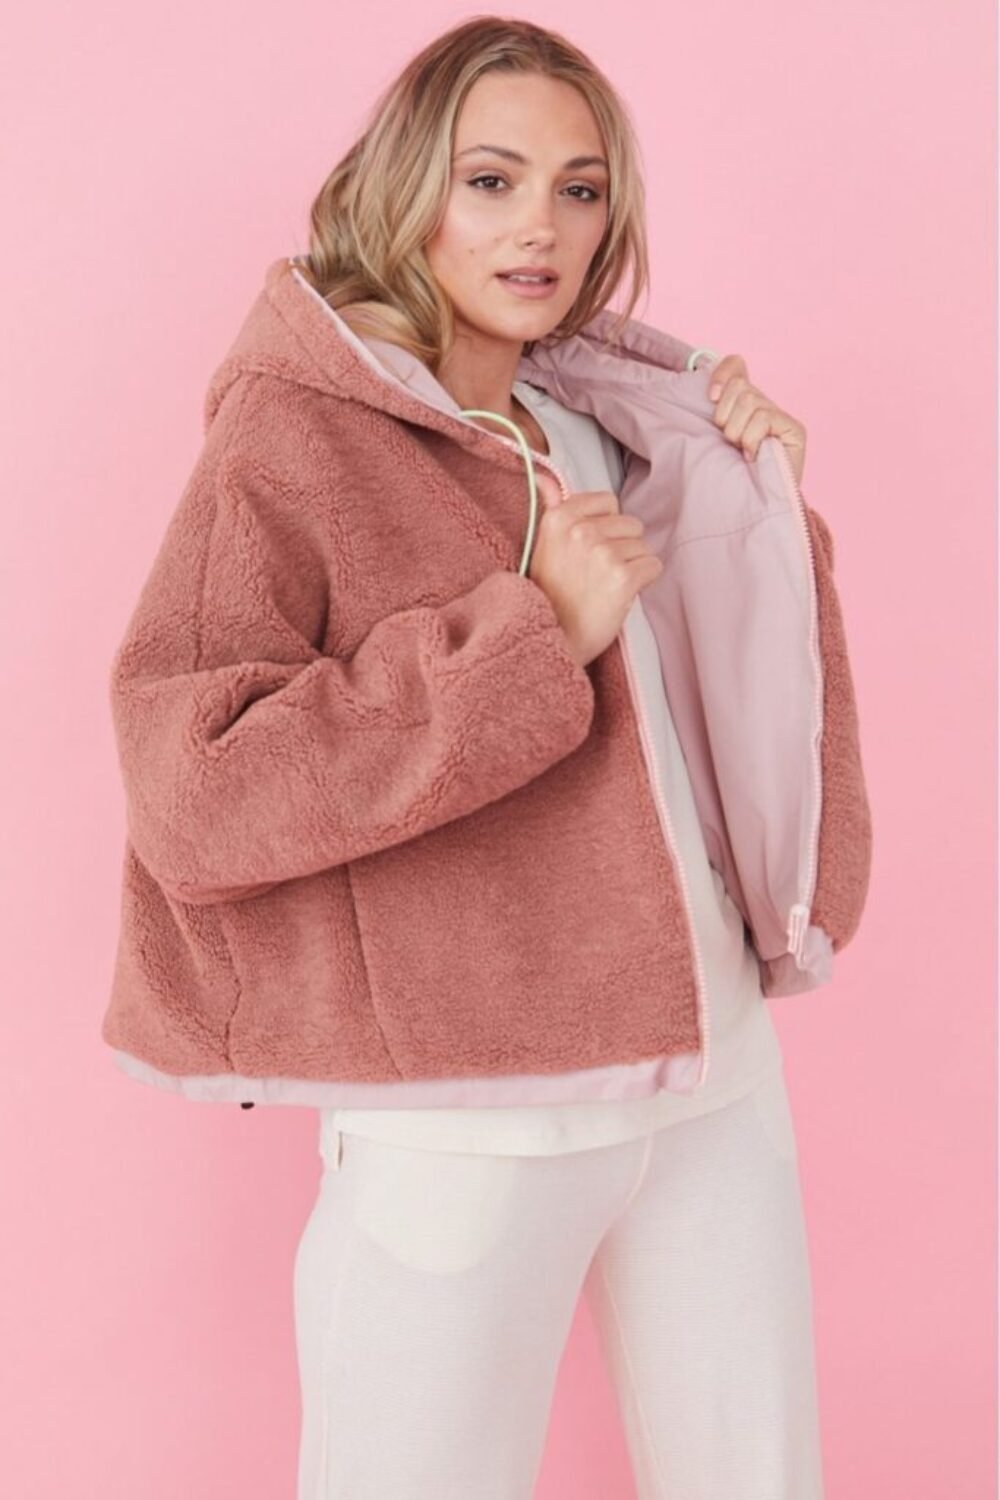 Shop Lux Pink Faux Shearling Reversible Hoodie Bomber Jacket and women's luxury and designer clothes at www.lux-apparel.co.uk